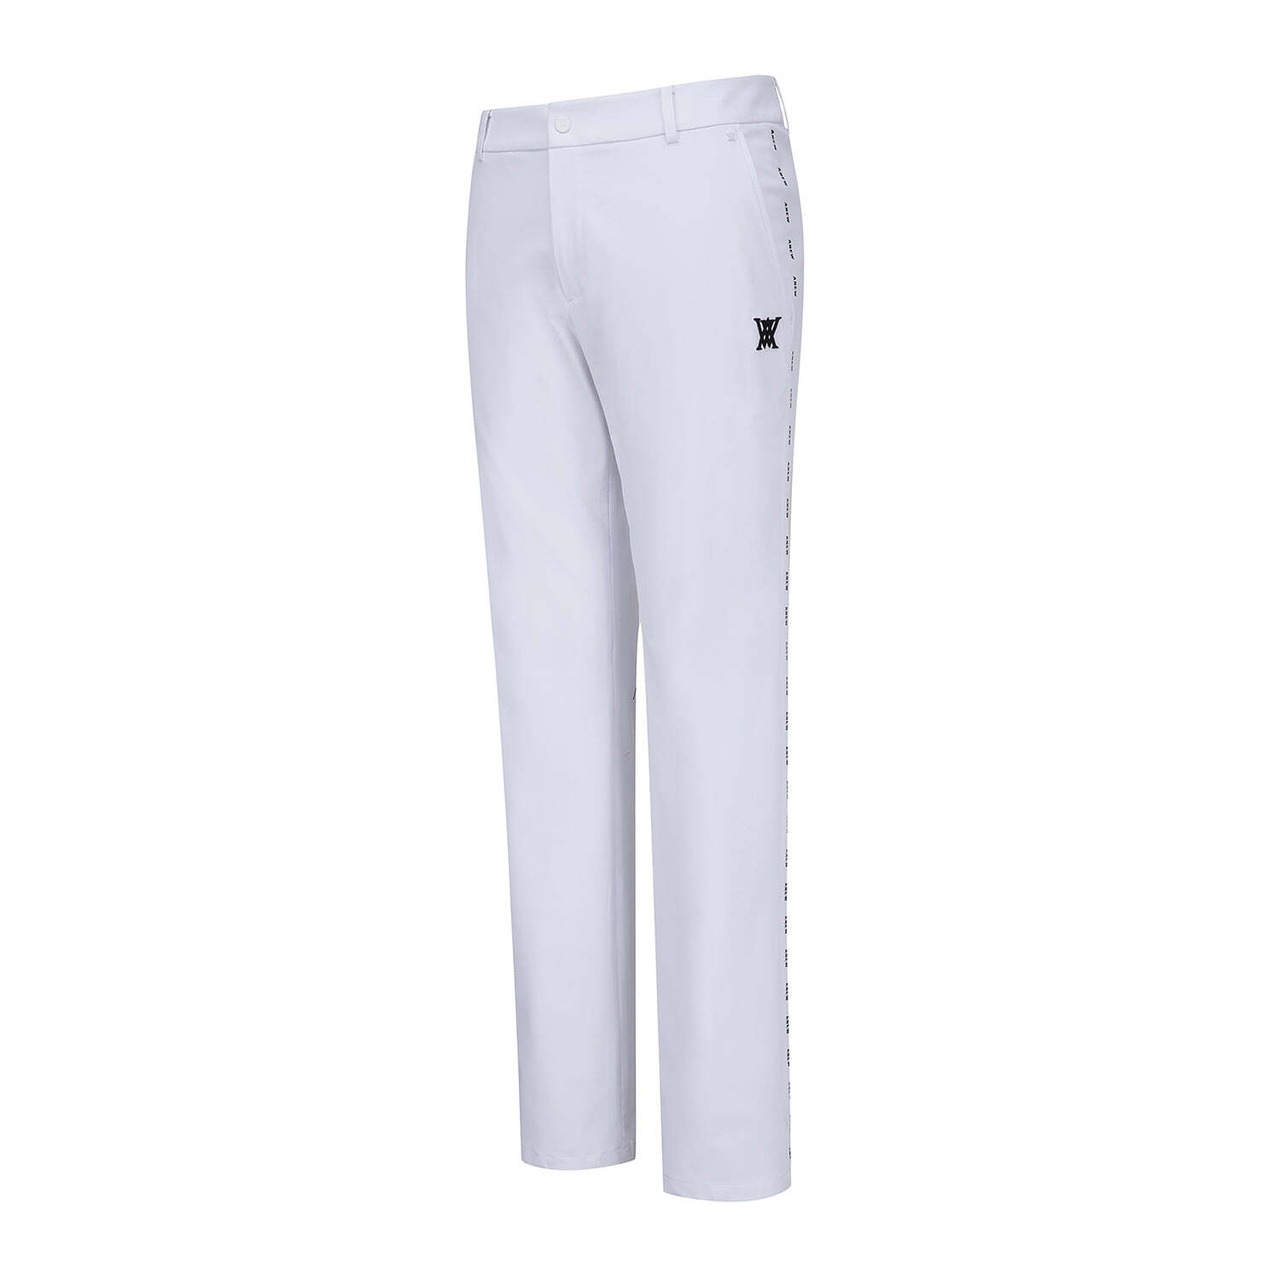 MEN SIDE ANEW LETTERING POINT LONG PANTS